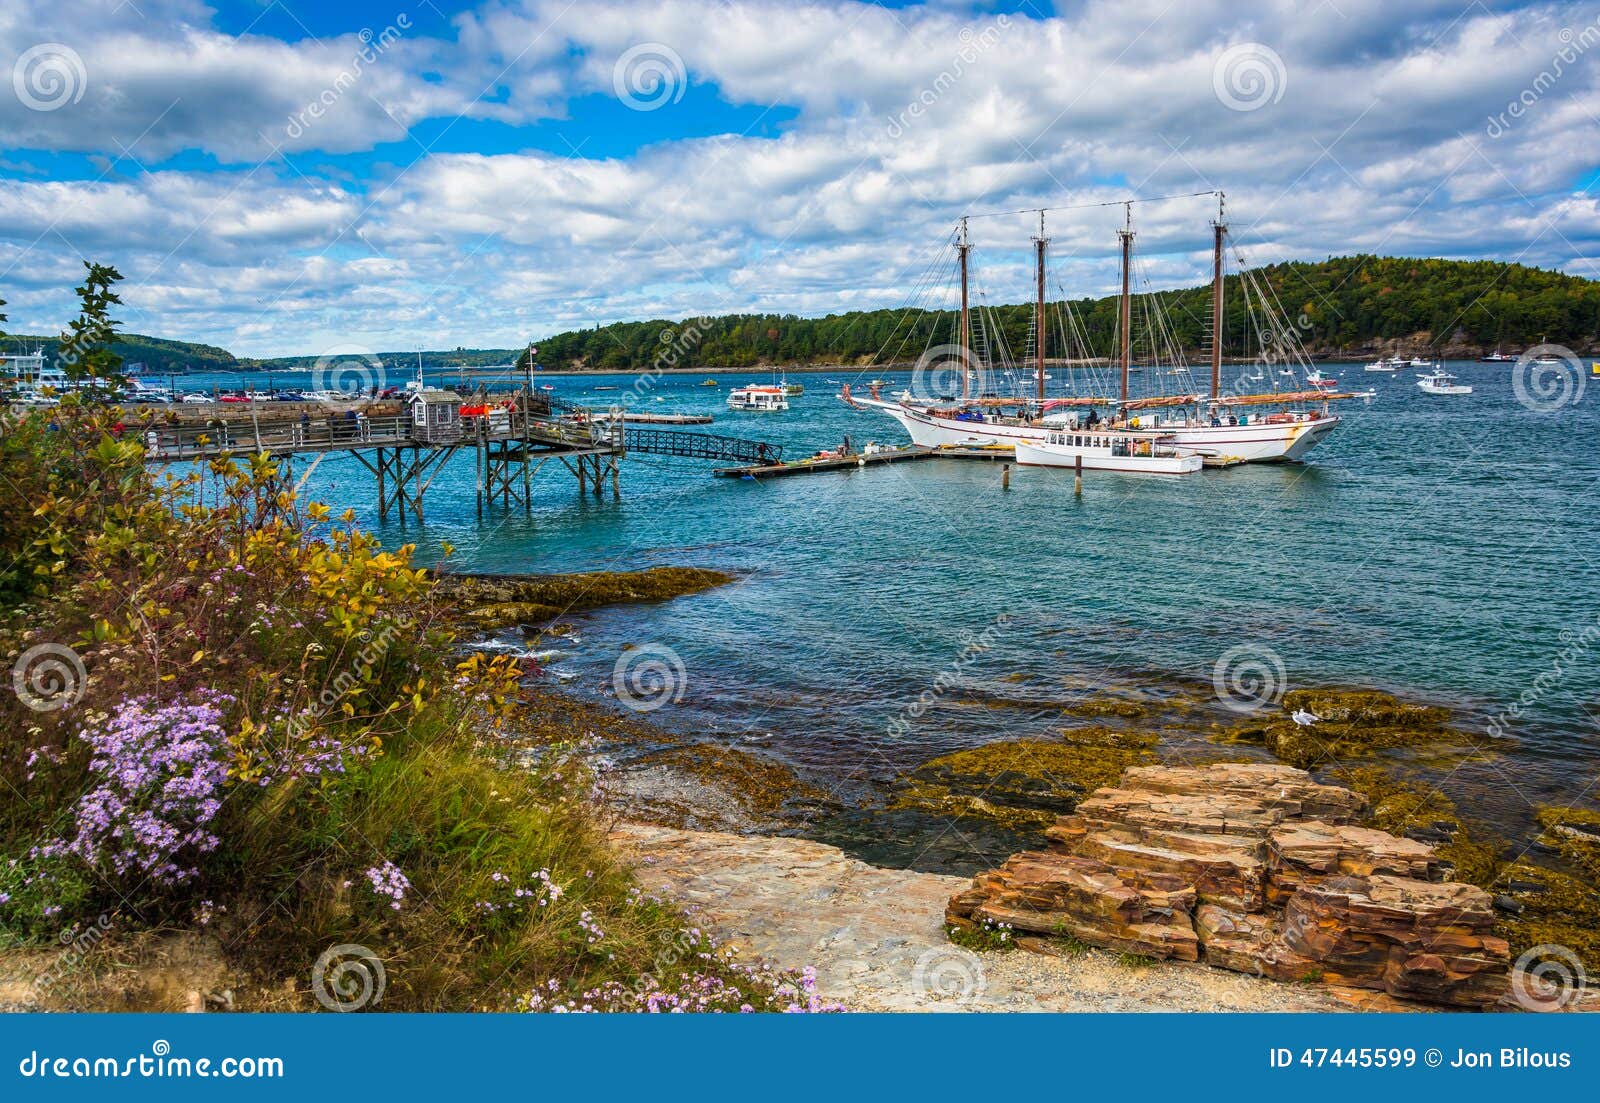 rocky coast and view of boats in the harbor at bar harbor, maine